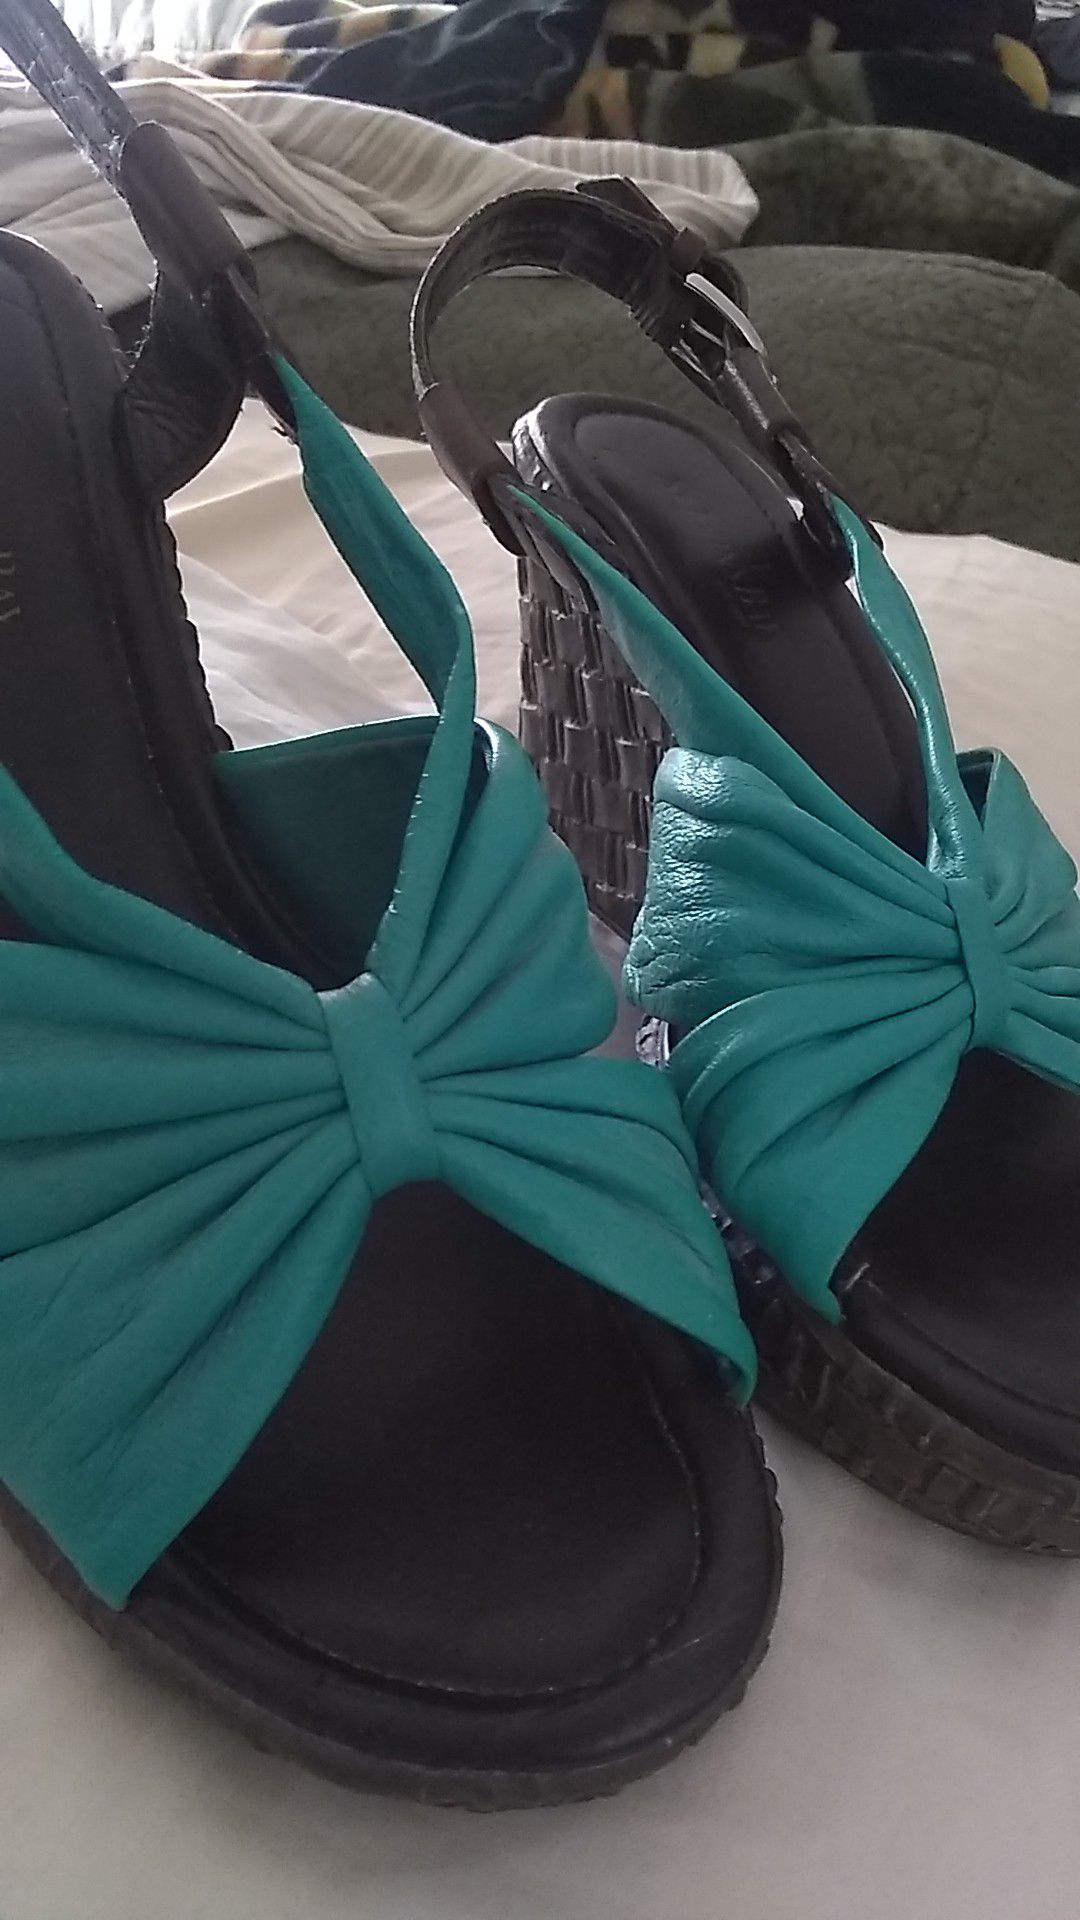 Emerald wedge shoes and brown leather 7.5